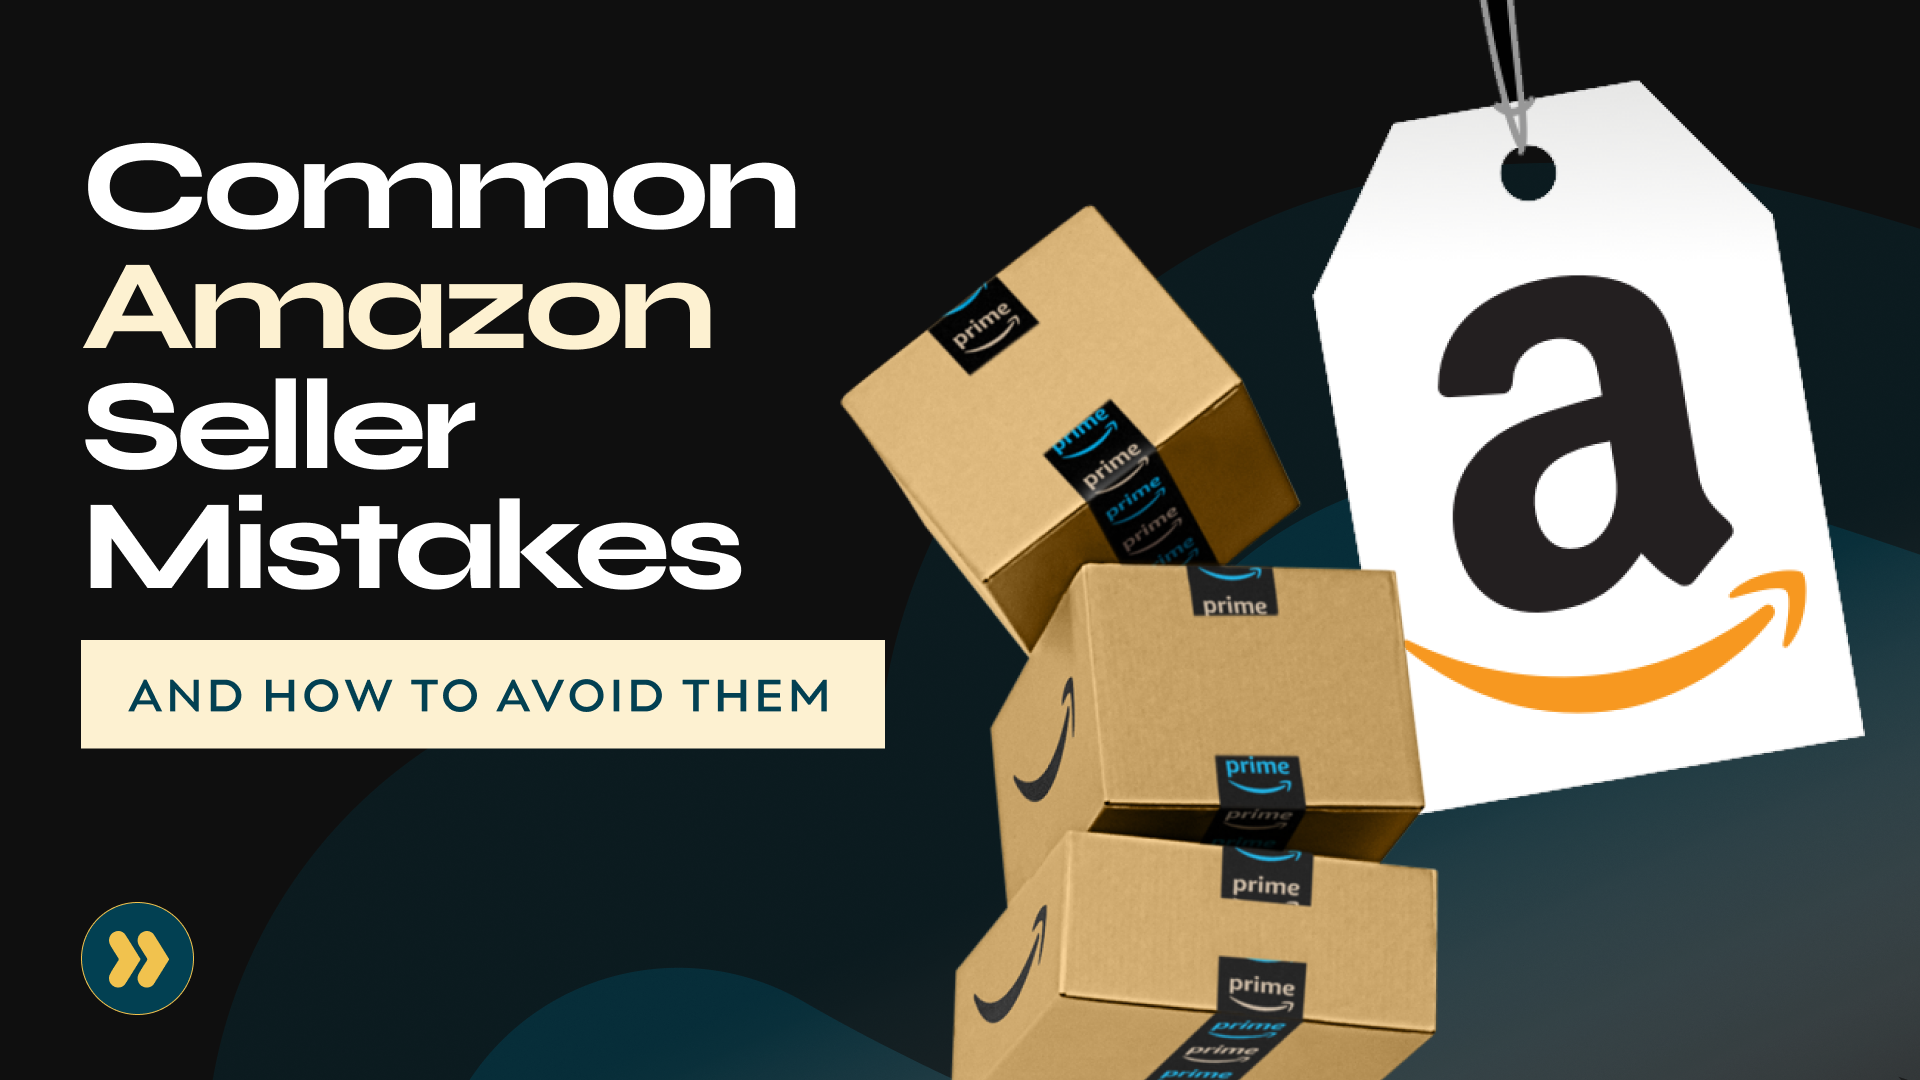 6 Amazon Seller Mistakes And How To Avoid Them